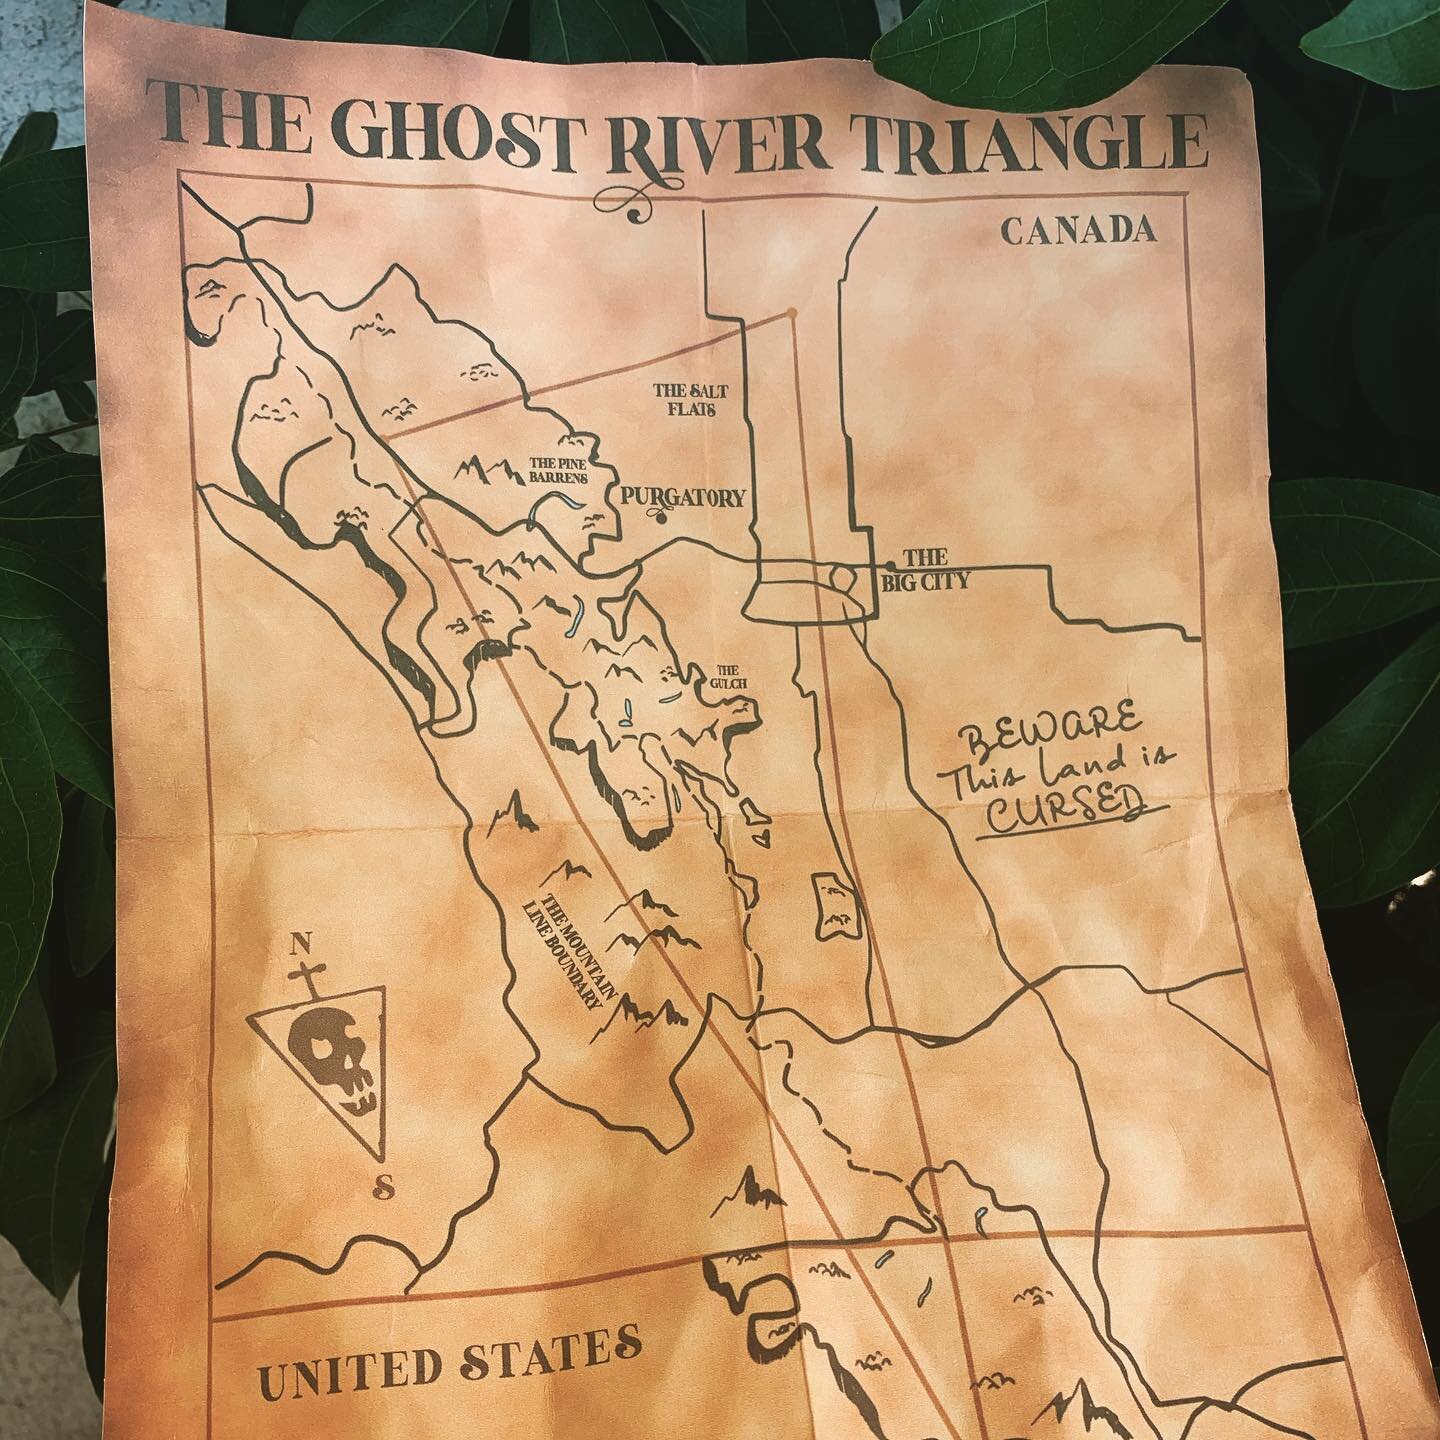 The Ghost River Triangle, my first map! I&rsquo;m so stoked with how this turned out, might add prints to my shop!
.
.
.
#WynonnaEarp #GhostRiverTriangle #Purgatory #WyattEarp #Map #MapMaking #Earper #WaverlyEarp #NicoleHaught #WayHaught #DocHolliday